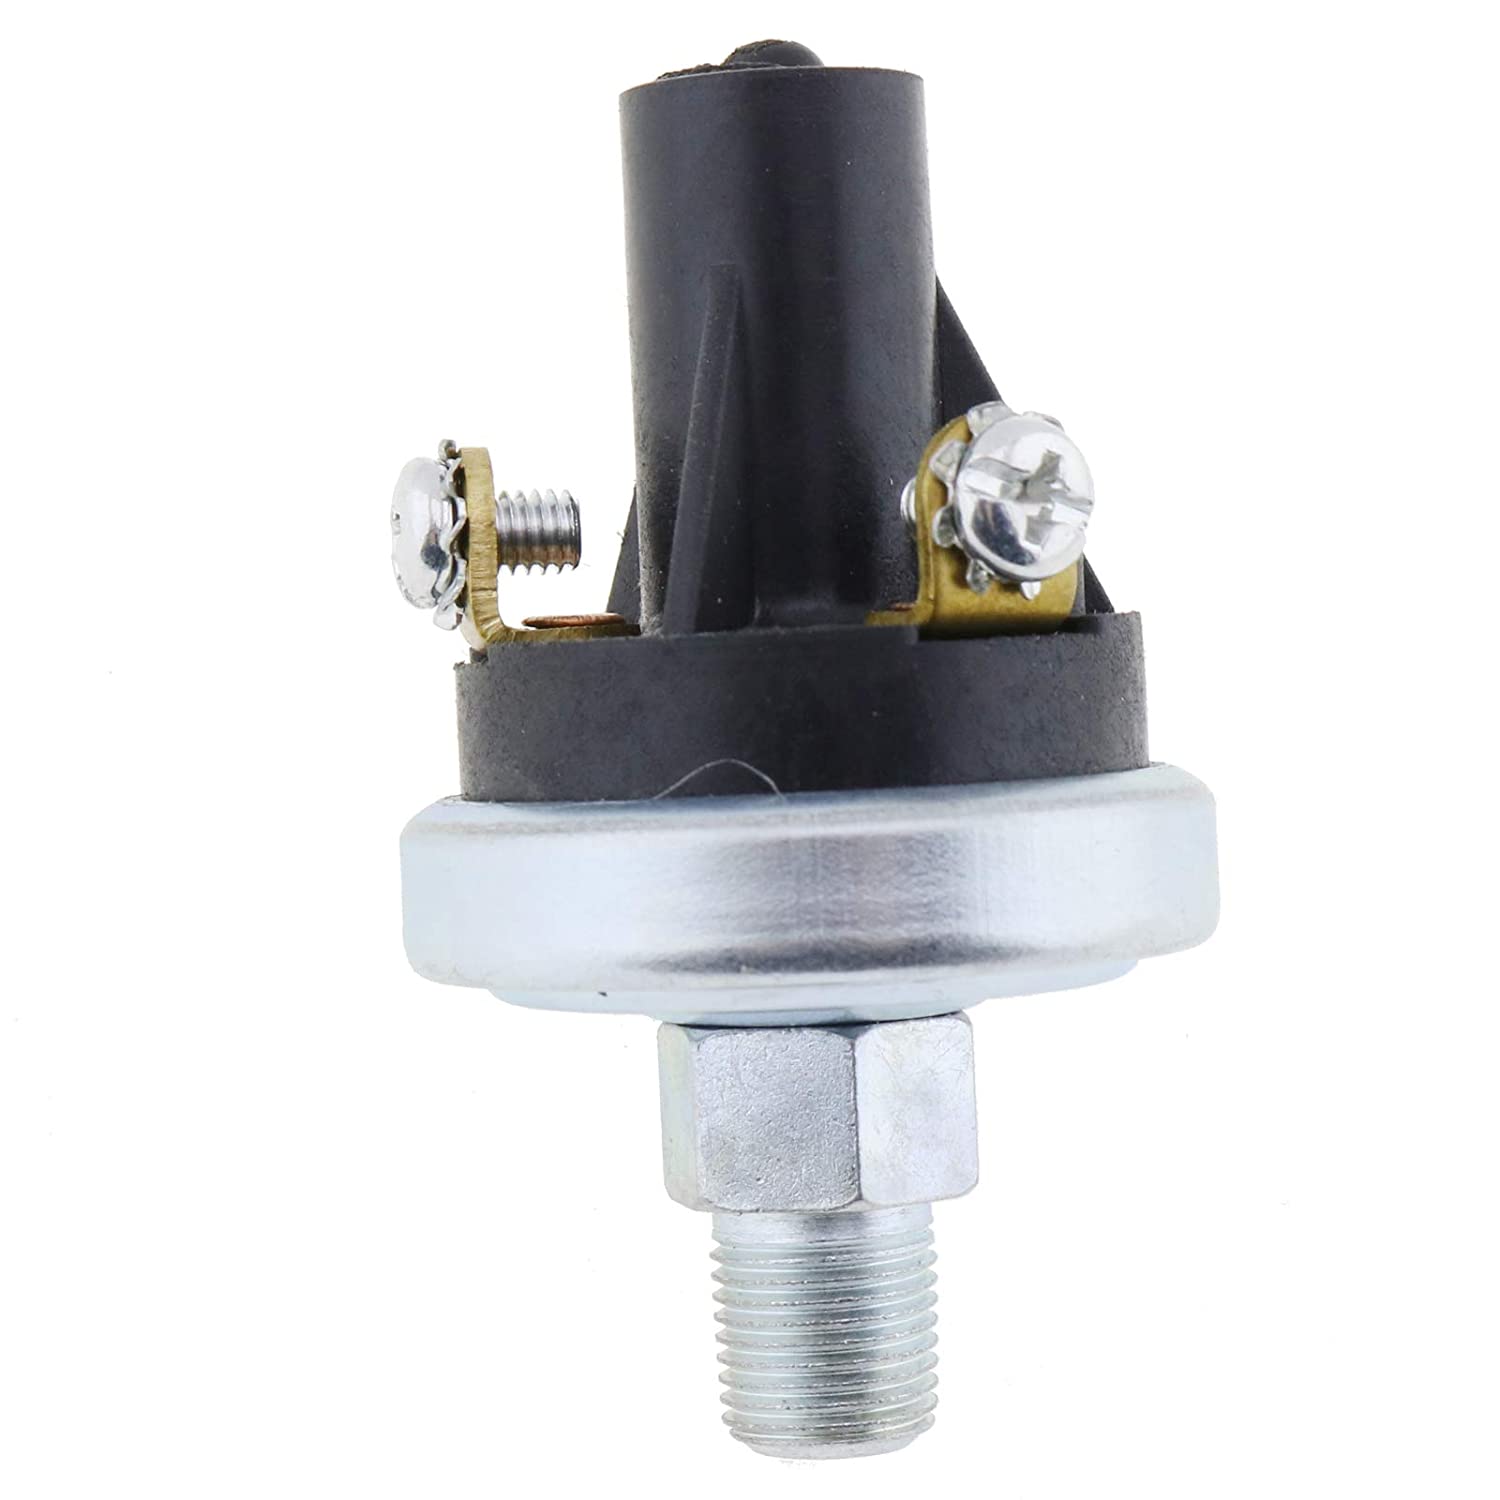 Adjustable Pressure Switch 765754 Set at 4 PSI 1/8-27NPT Highest to 7 PSI Normally Open for Hobbs Honeywell M4006-4 CAT 4D-4785 - KUDUPARTS